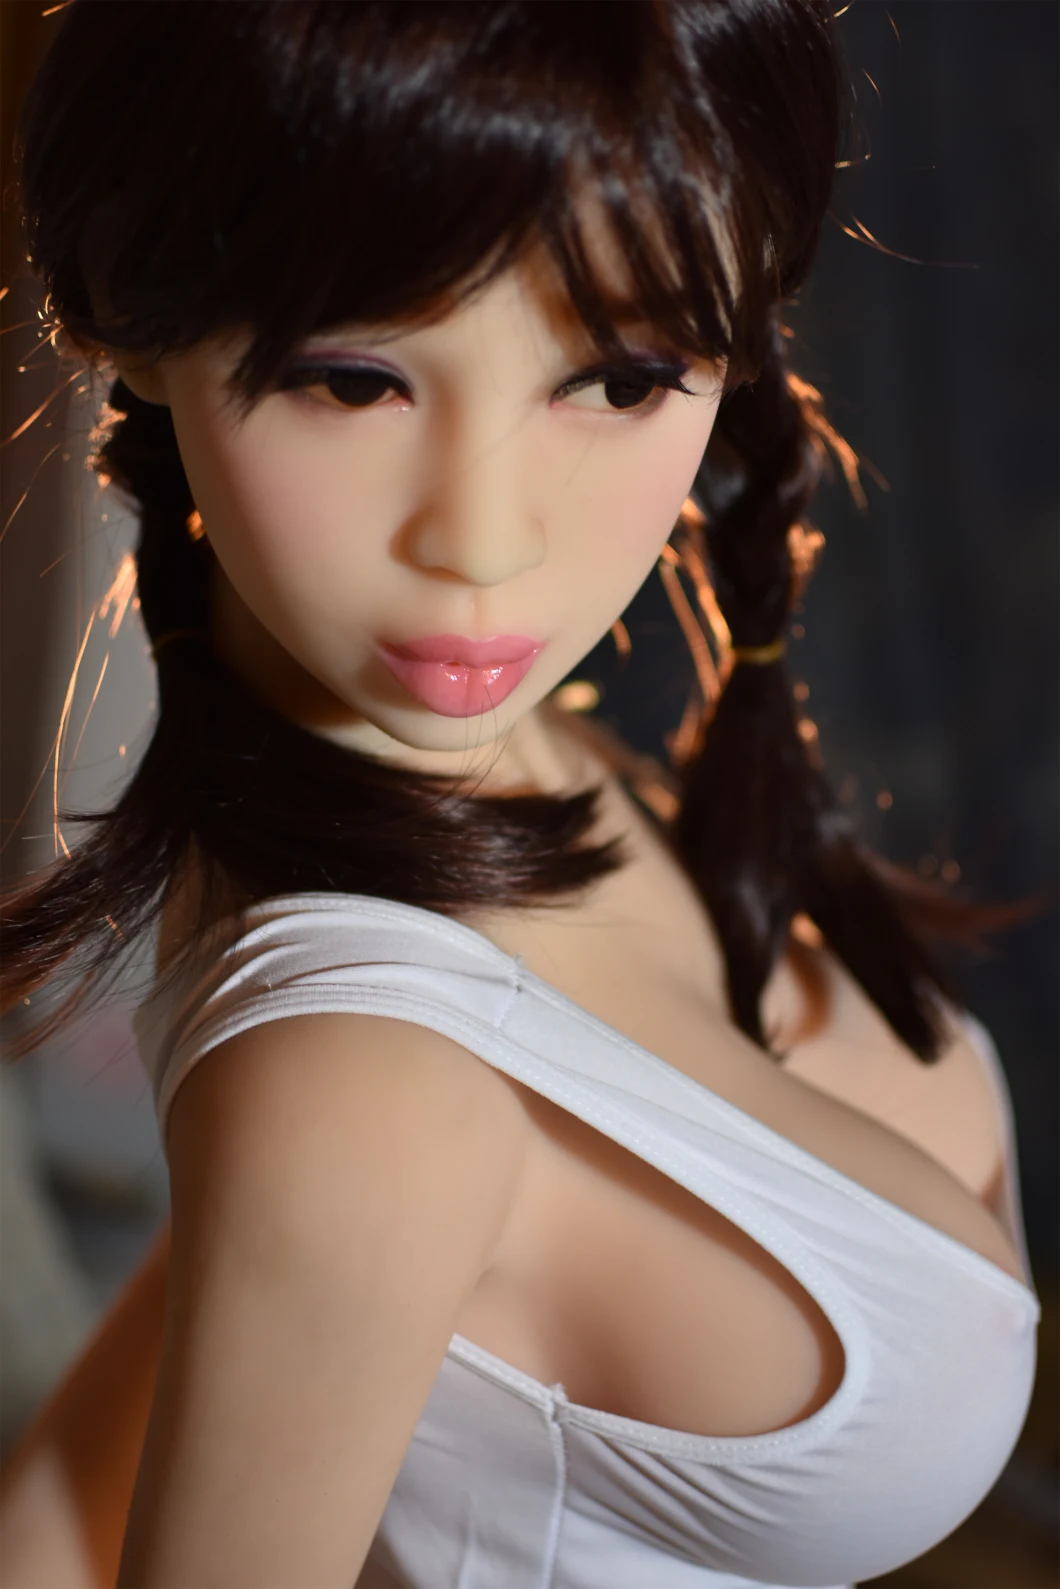 Sex Doll Love Doll Adult Toys for Men